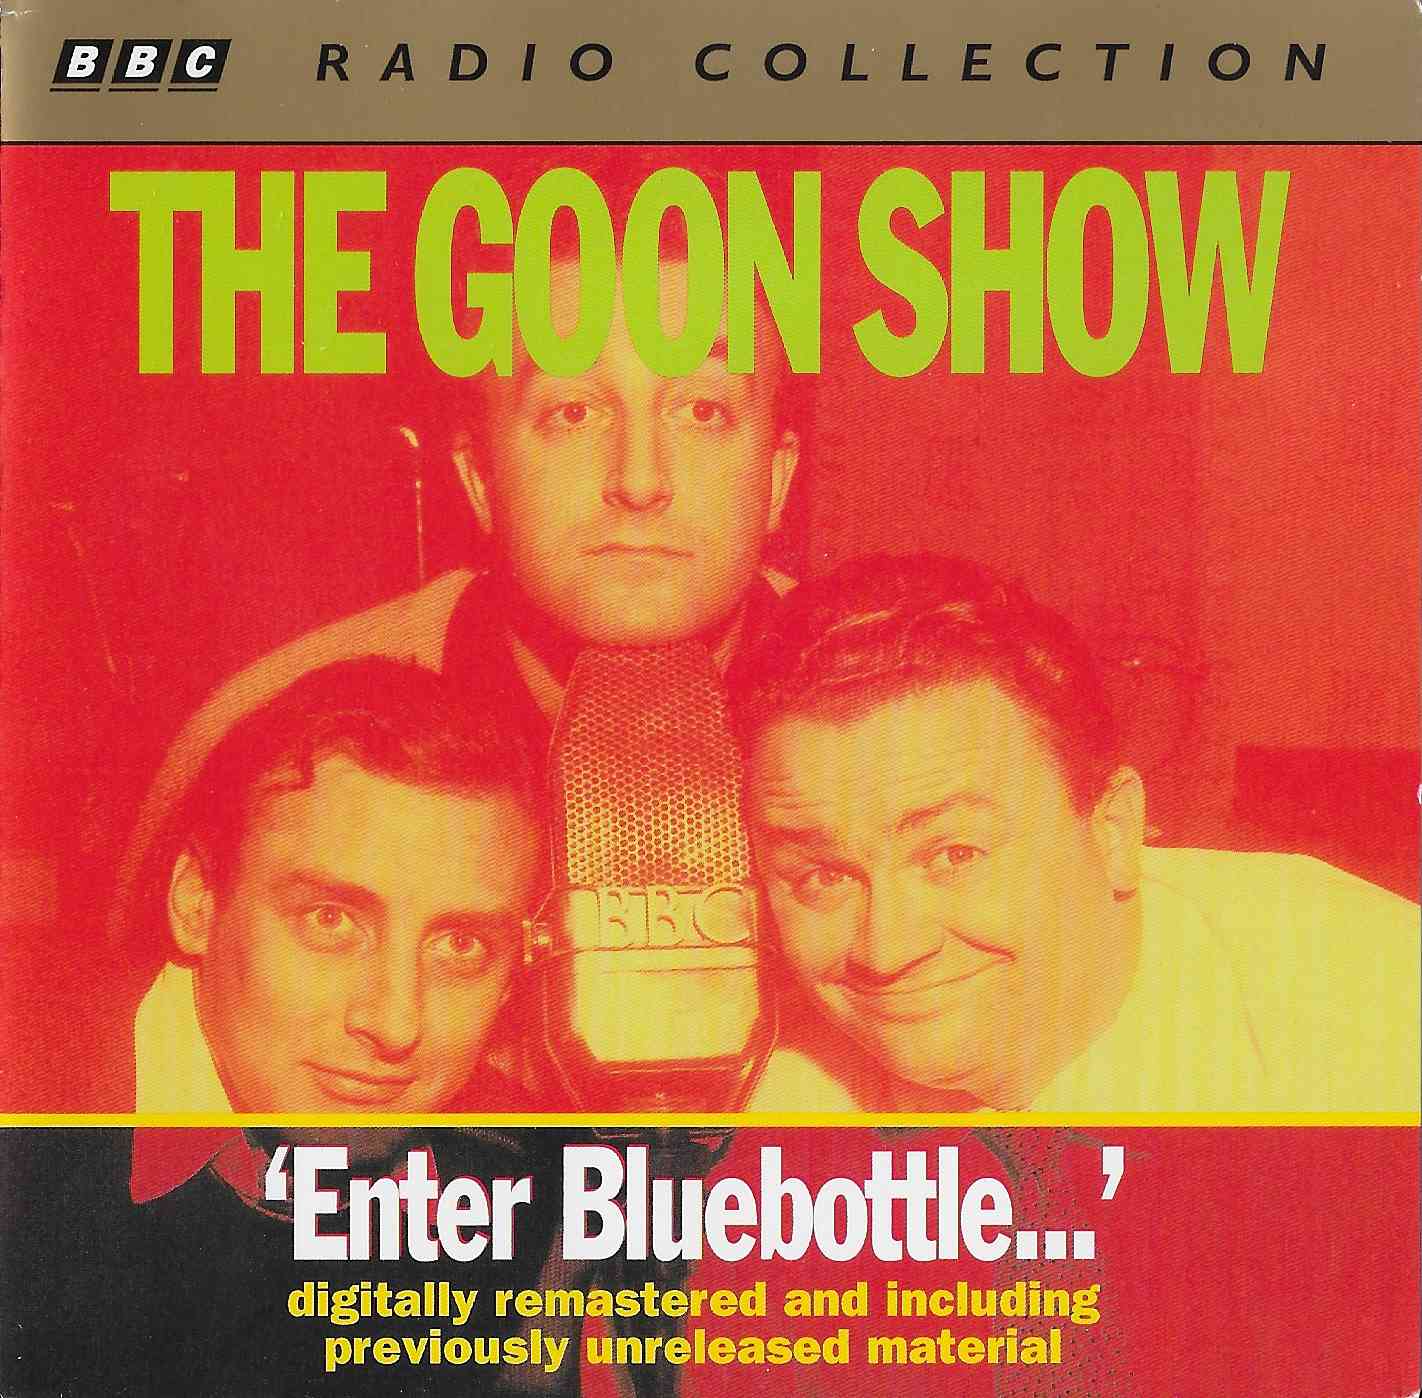 Picture of ISBN 978-0-563-38859-3 The Goon Show 2 - Enter Bluebottle ... by artist Spike Milligan / Eric Sykes / Larry Stephens from the BBC cds - Records and Tapes library